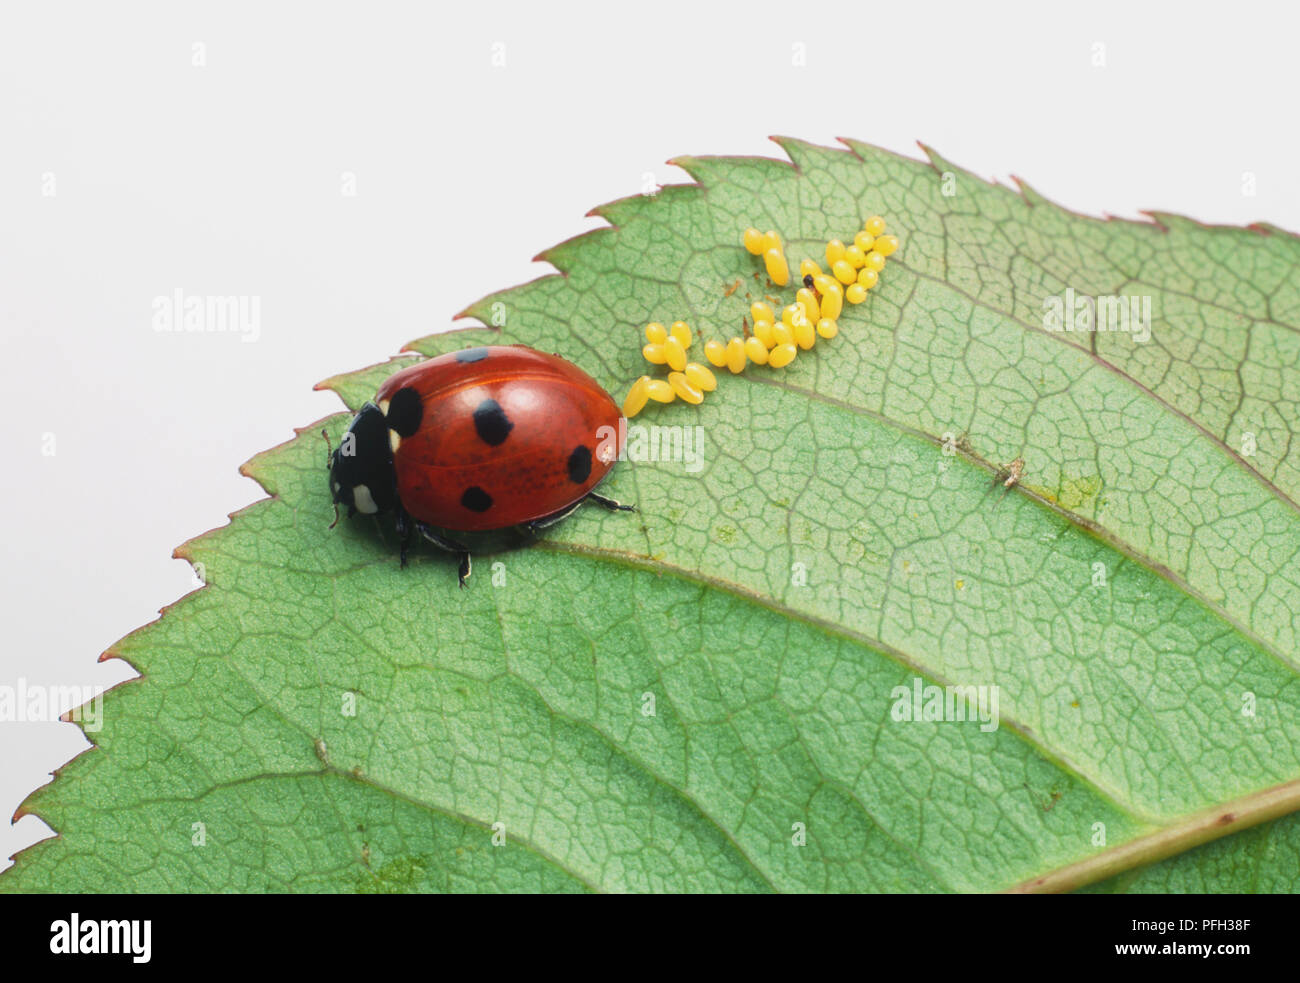 Seven-Spotted Ladybird (Coccinella Septempunctata) laying eggs on a green leaf, close up Stock Photo